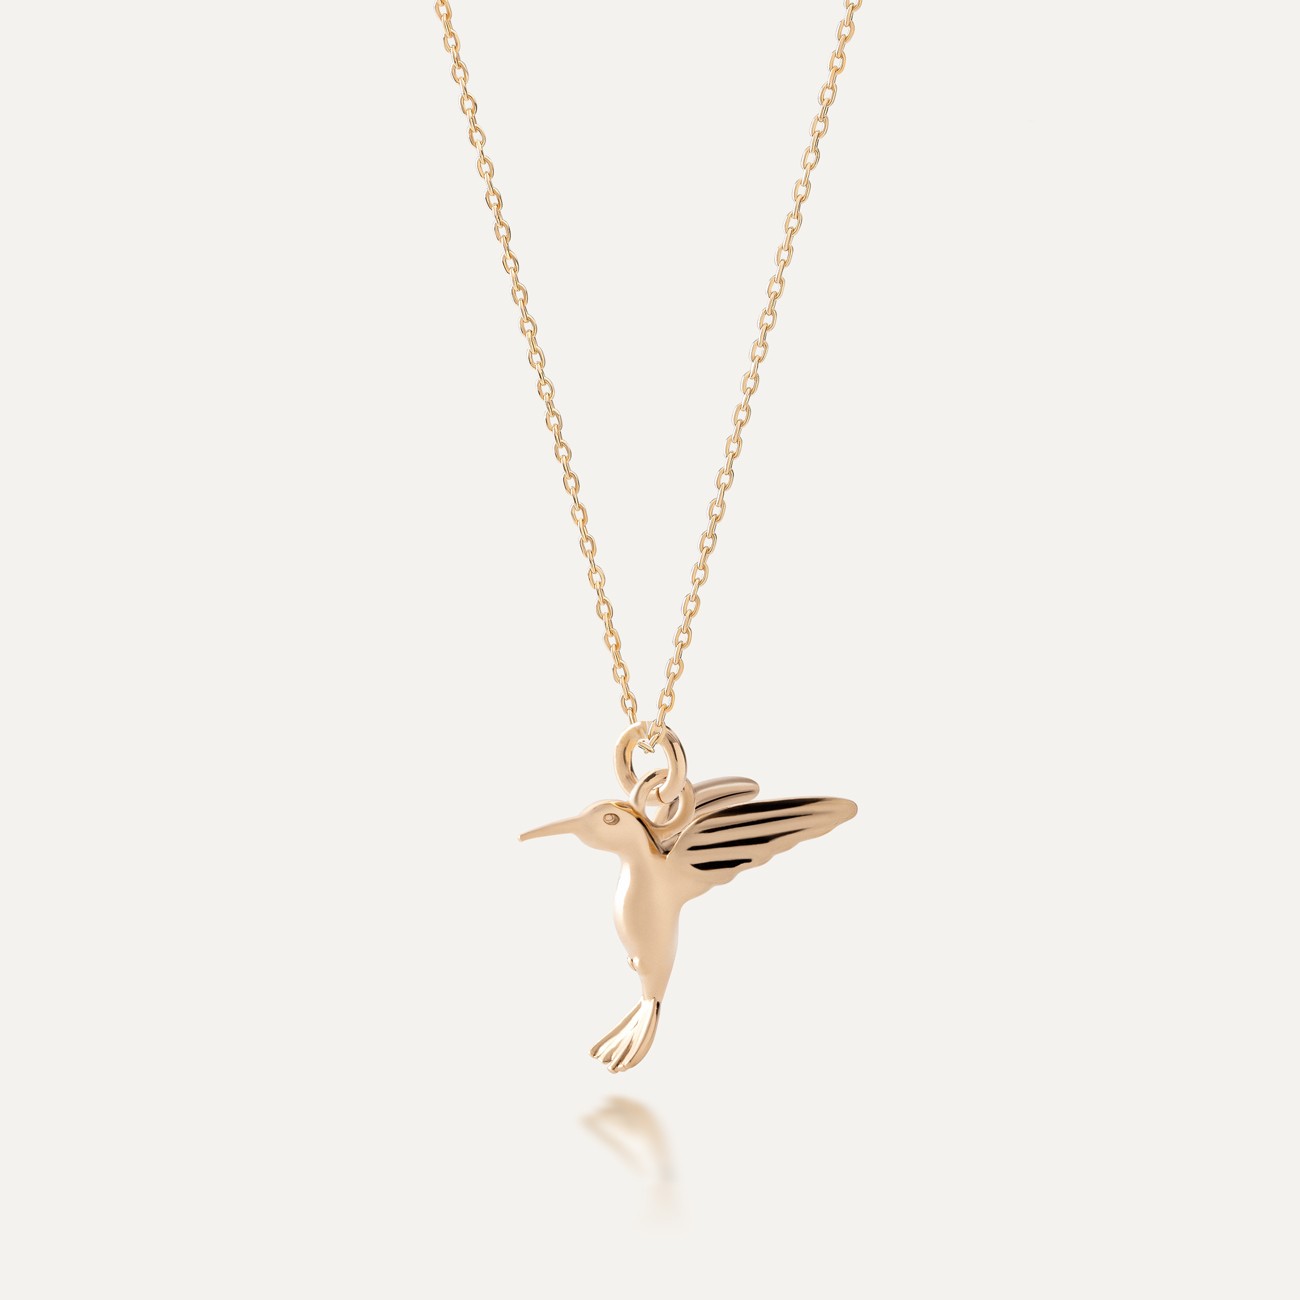 Hummingbird necklace sterling silver 925